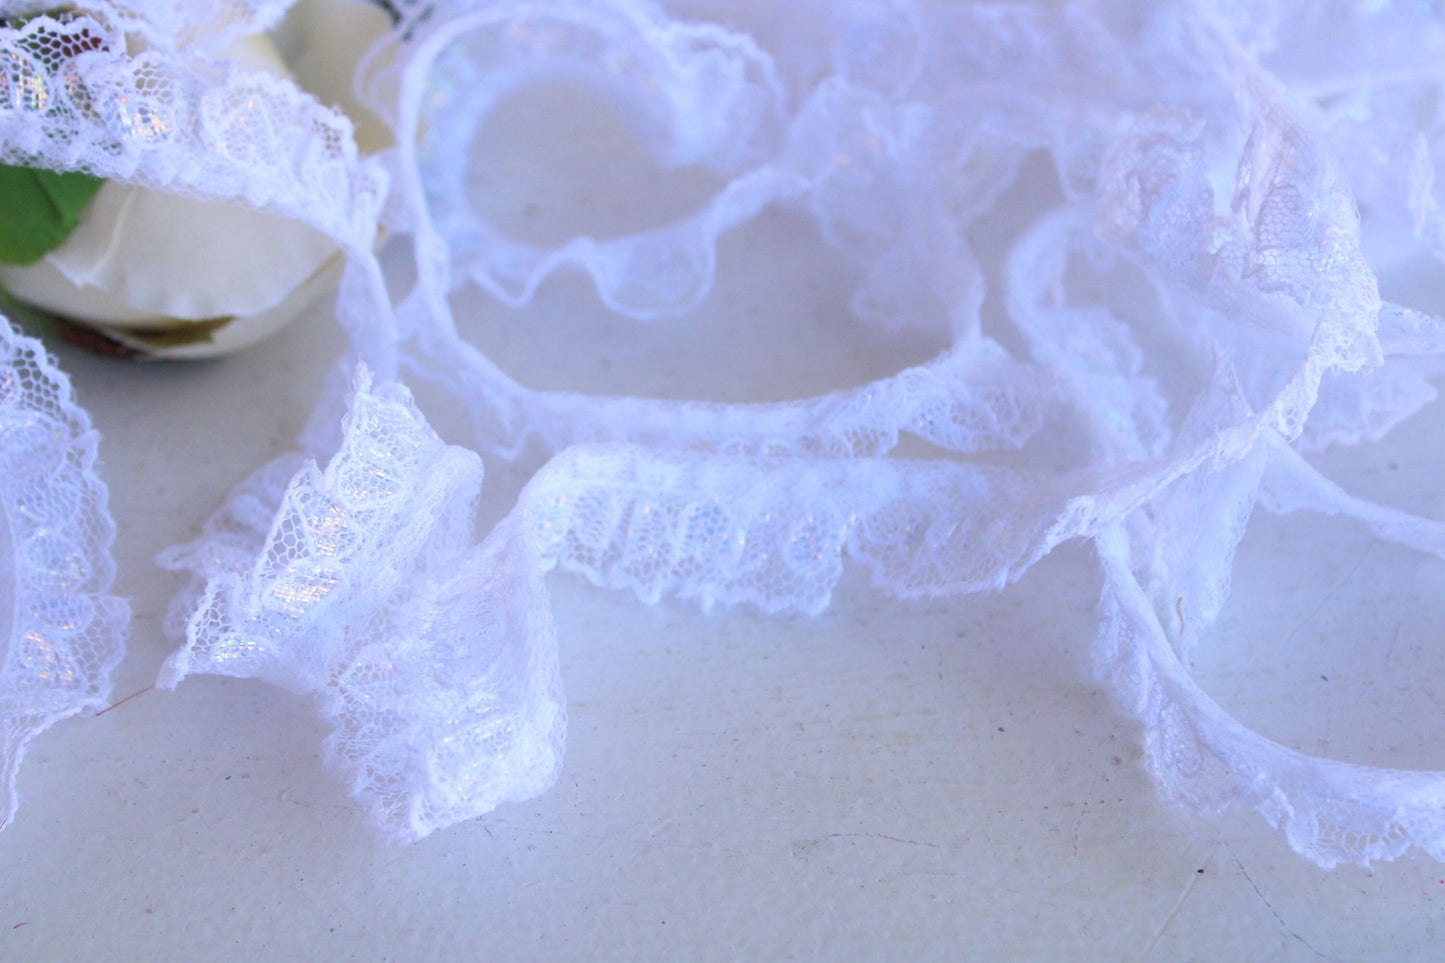 Vintage Ruffled Lace Trim, White with Glittery Hearts,  .75" Wide, 4 yards